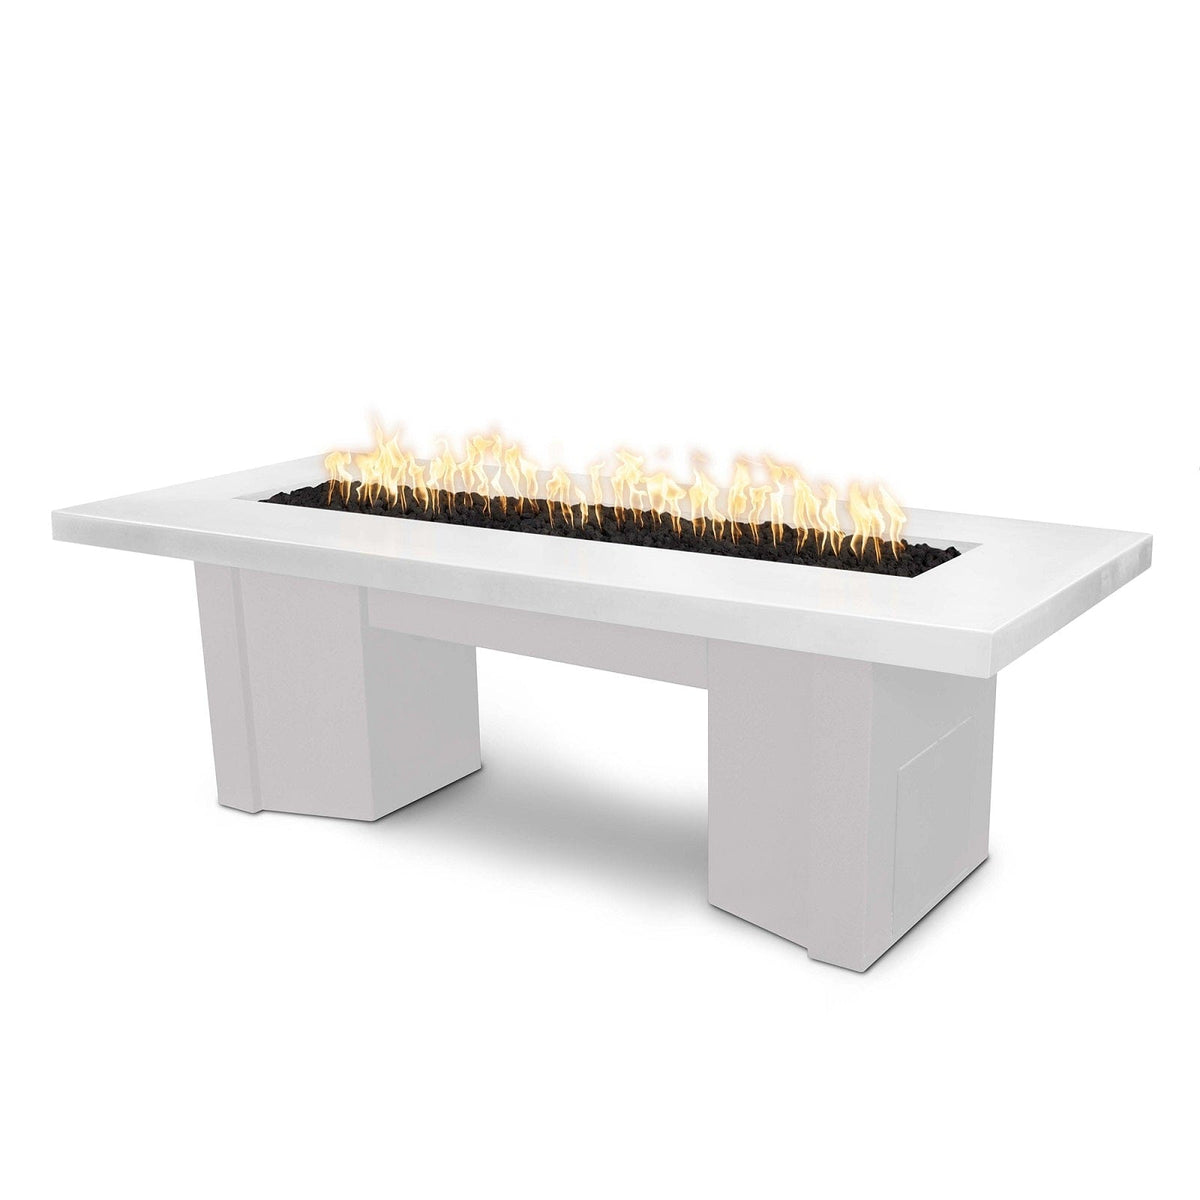 The Outdoor Plus Fire Features Limestone (-LIM) / White Powder Coated Steel (-WHT) The Outdoor Plus 78&quot; Alameda Fire Table Smooth Concrete in Natural Gas - Flame Sense System with Push Button Spark Igniter / OPT-ALMGFRC78FSEN-NG